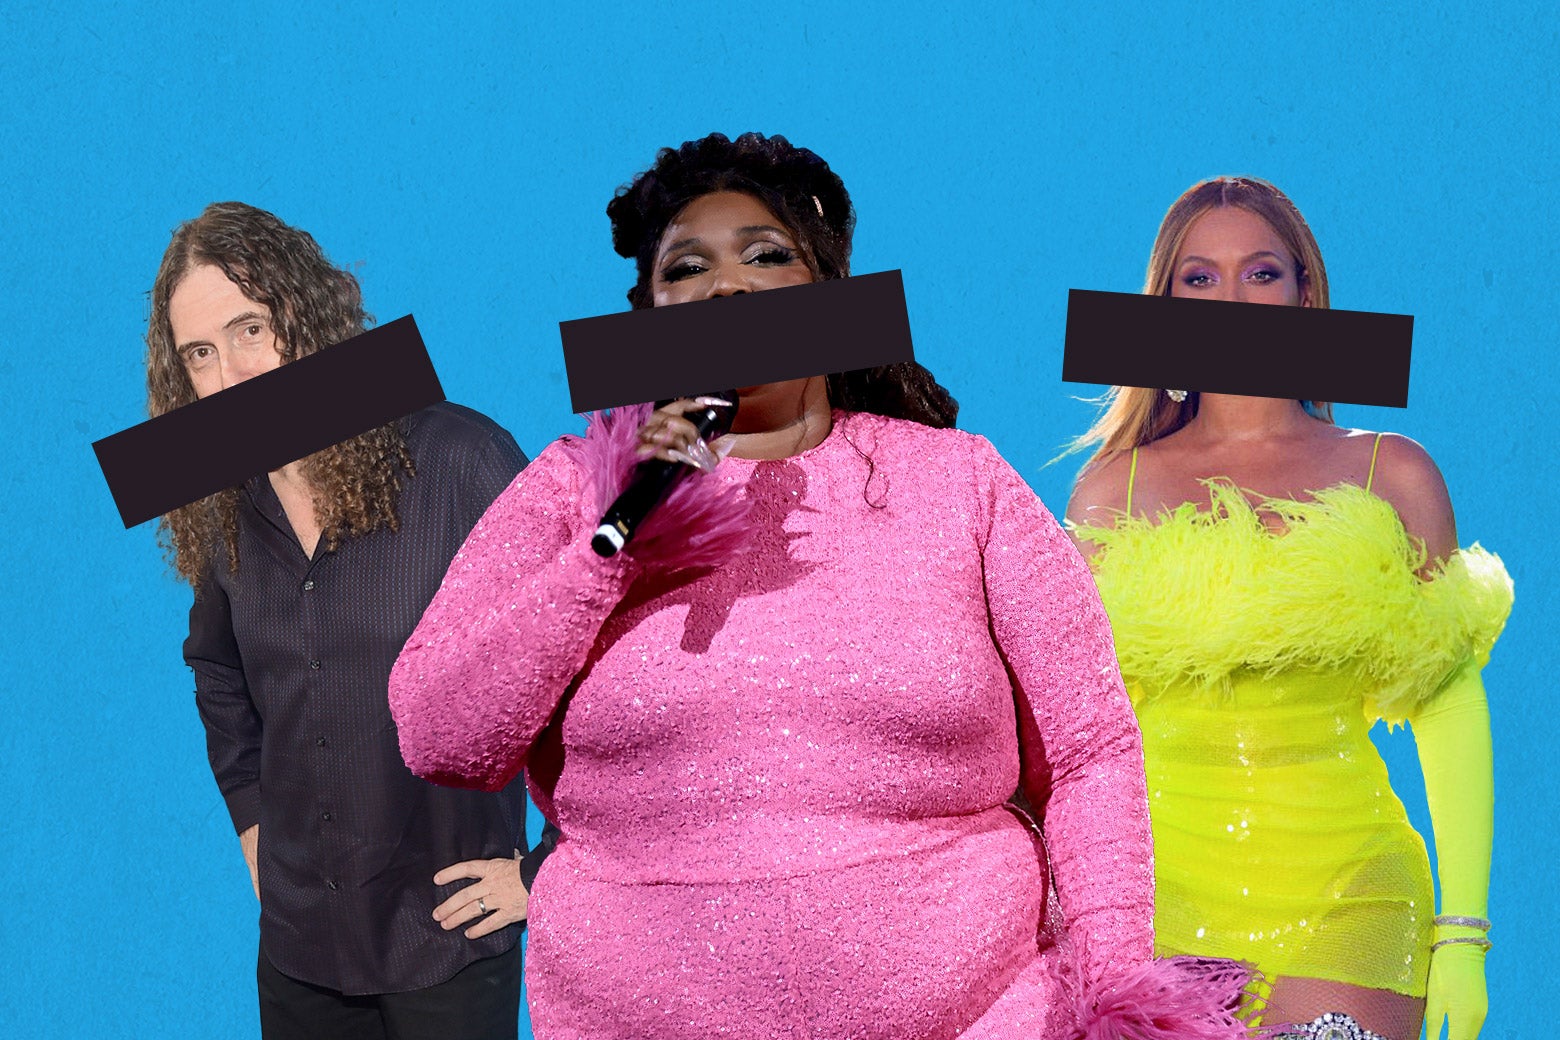 The three music stars are photoshopped performing against a blue background. Over their mouths, black censor bars.